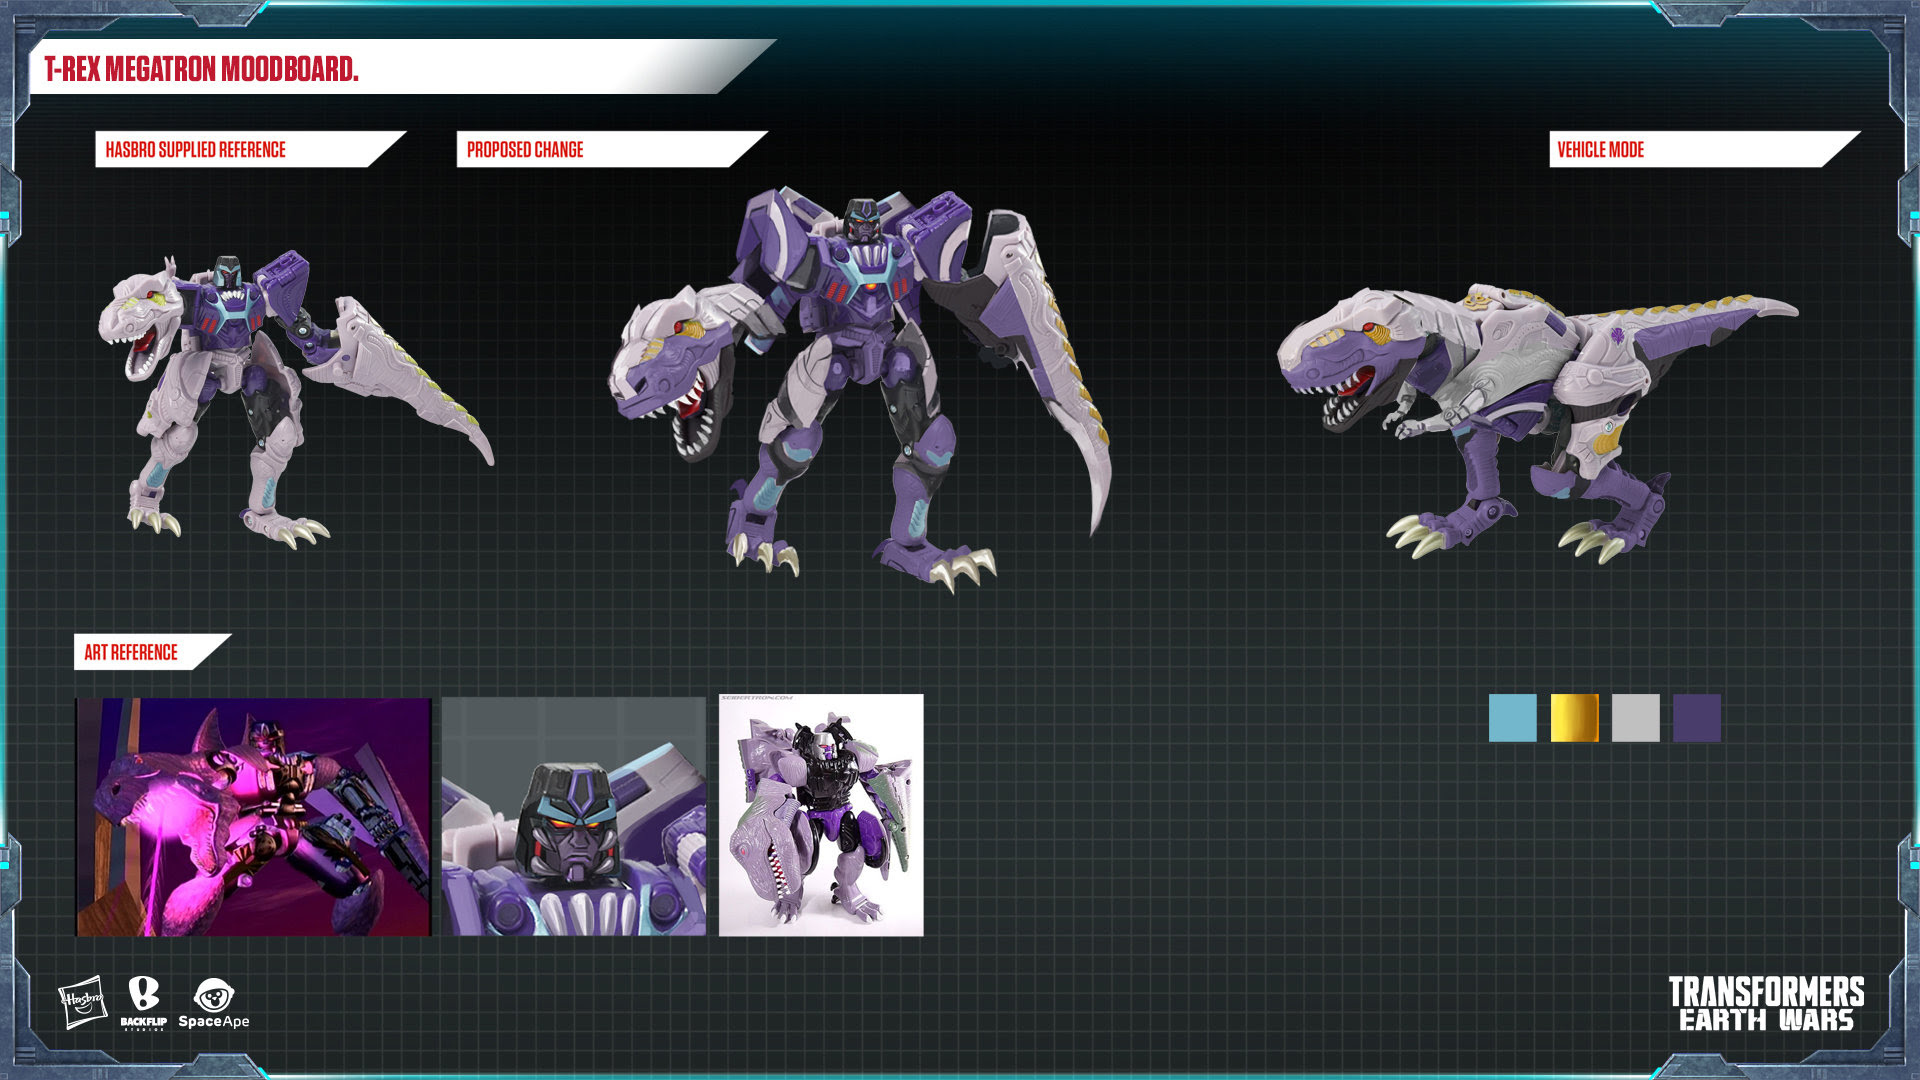 Transformers News: Transformers: Earth Wars Event - Well, That's just Prime!